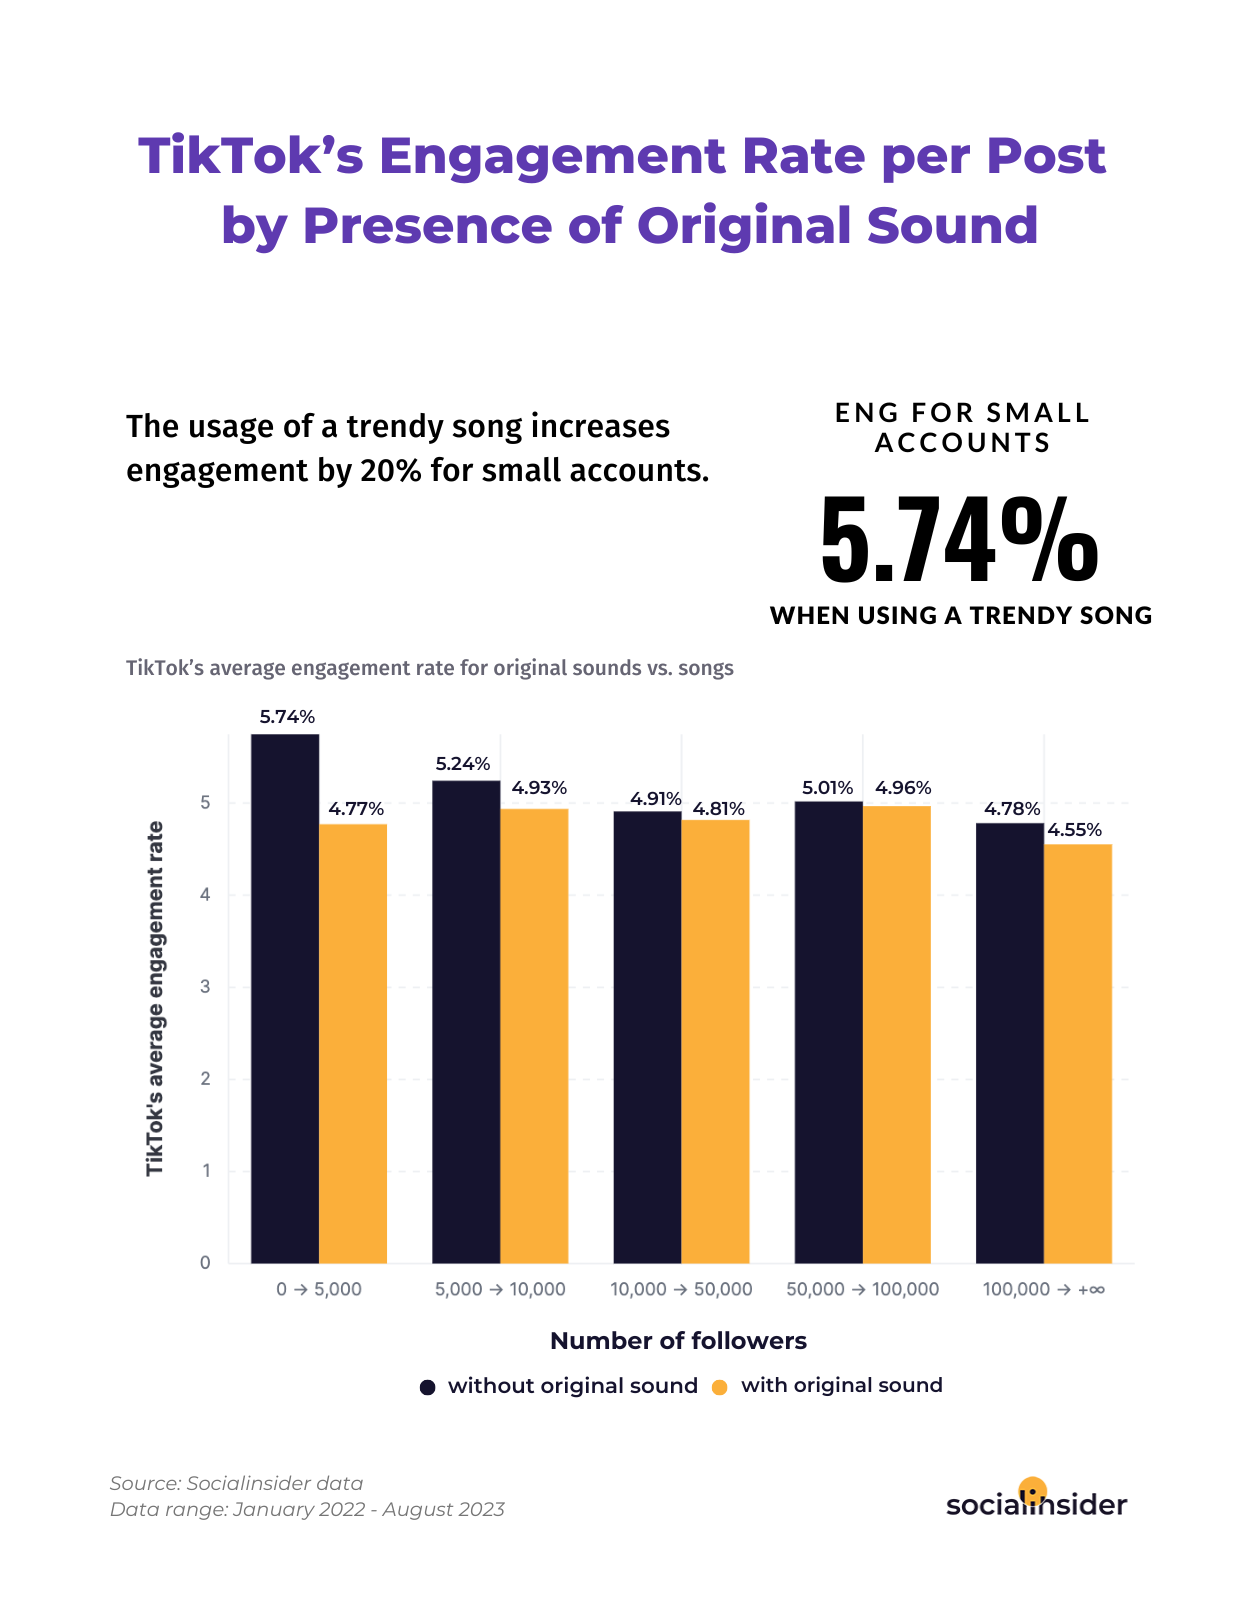 Here is a chart showing engagement rate benchmarks for TikTok when using a trendy song vs an original sound.